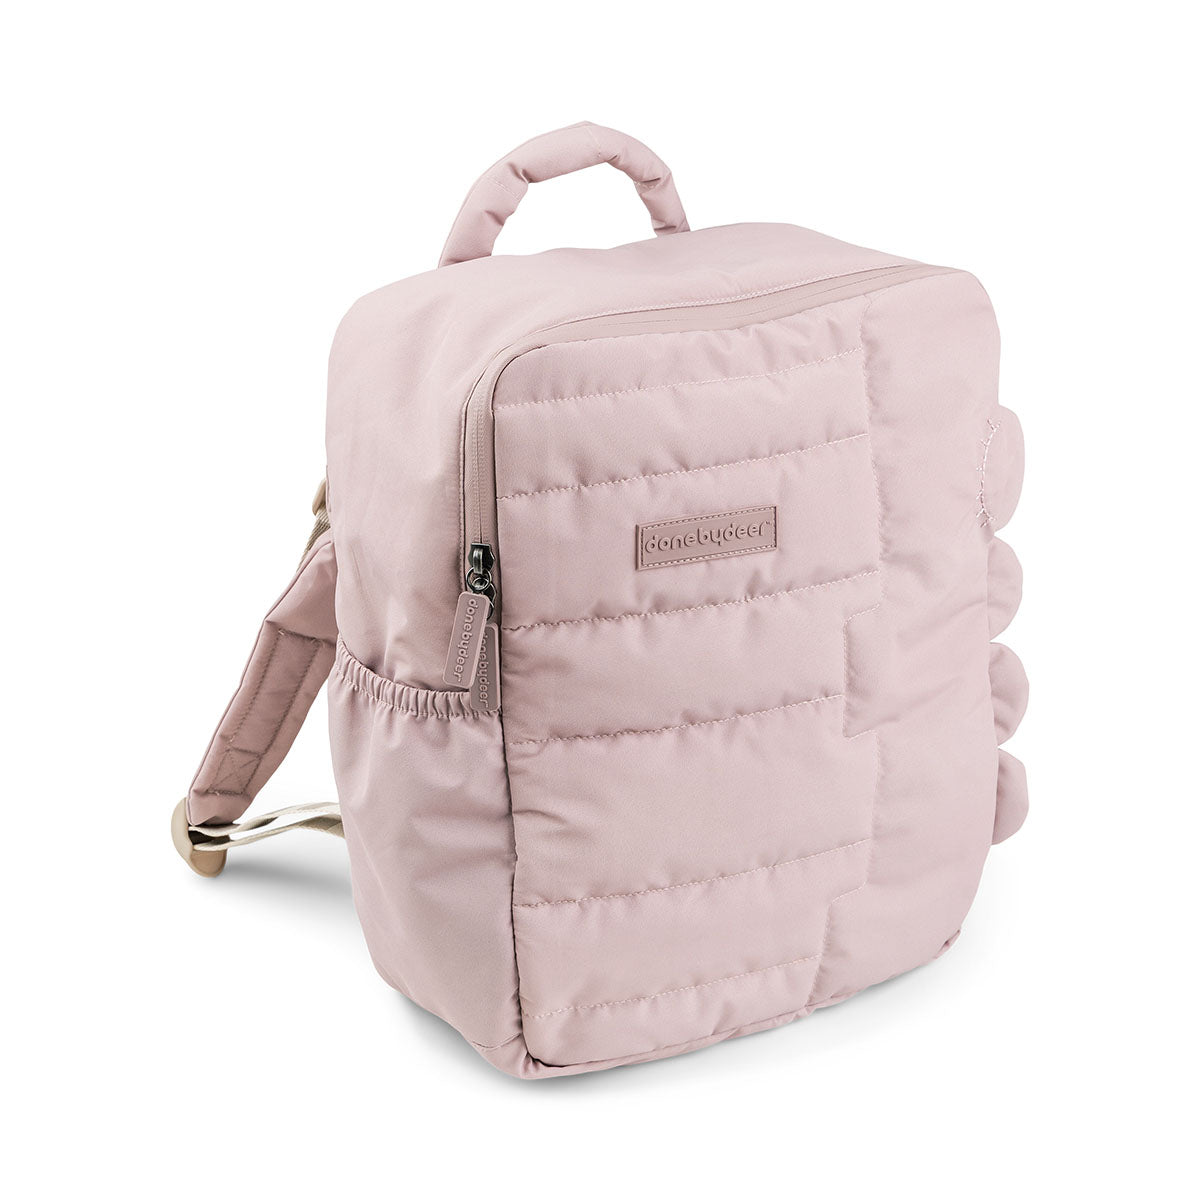 Quilted kids backpack - Croco - Powder